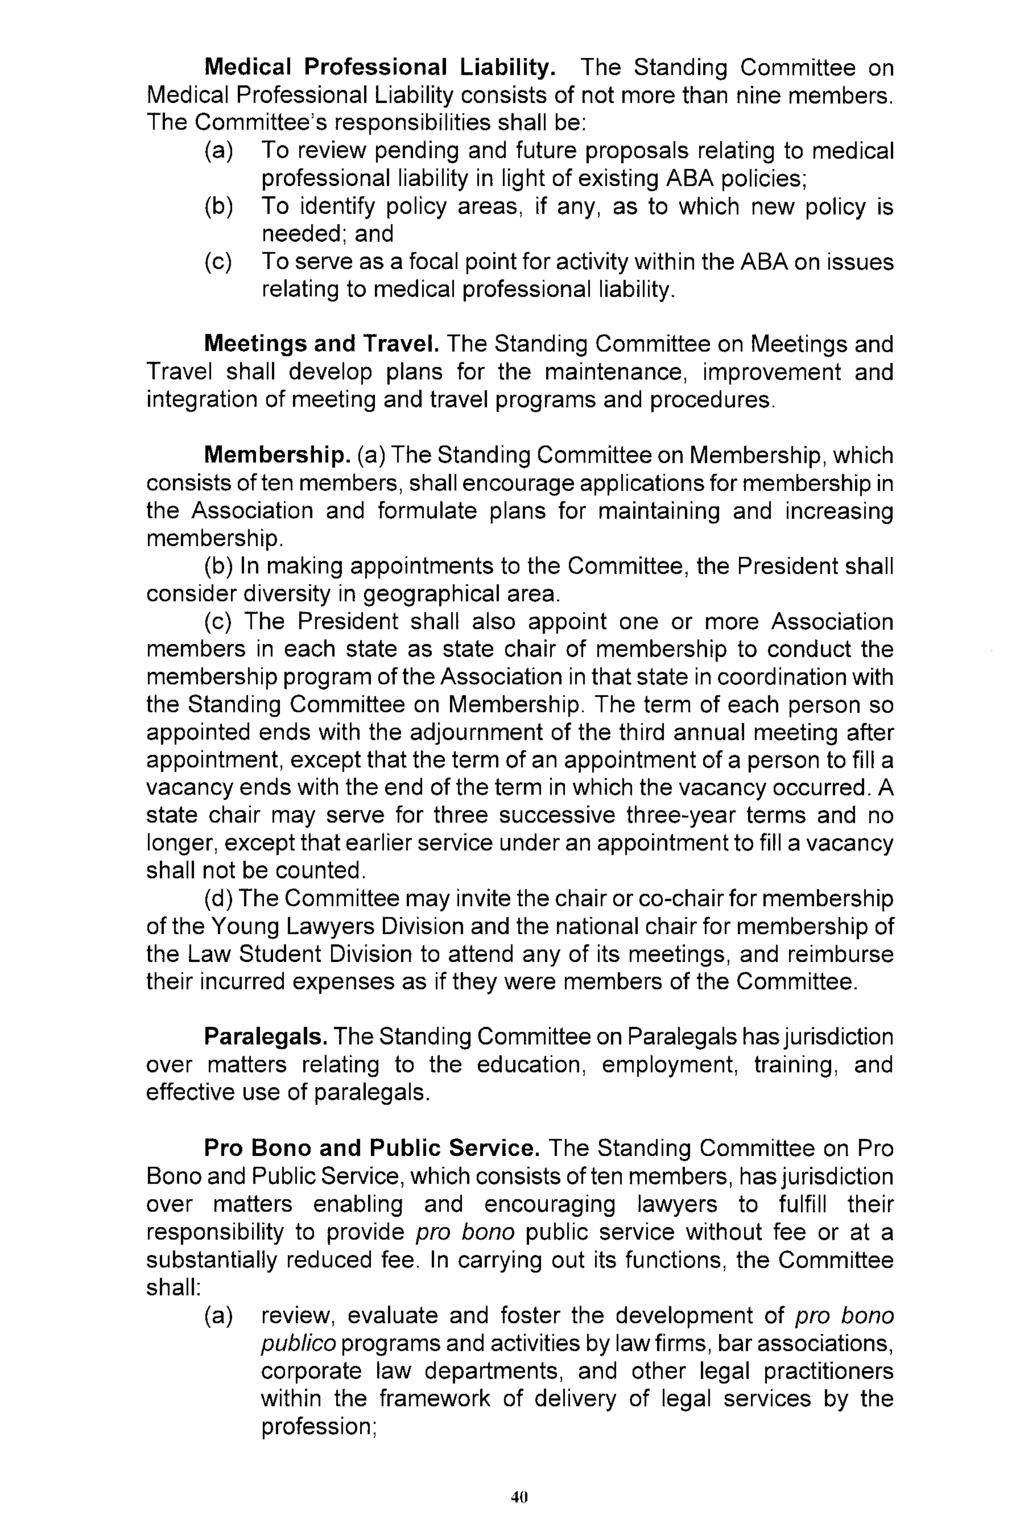 Medical Professional Liability. The Standing Committee on Medical Professional Liability consists of not more than nine members.